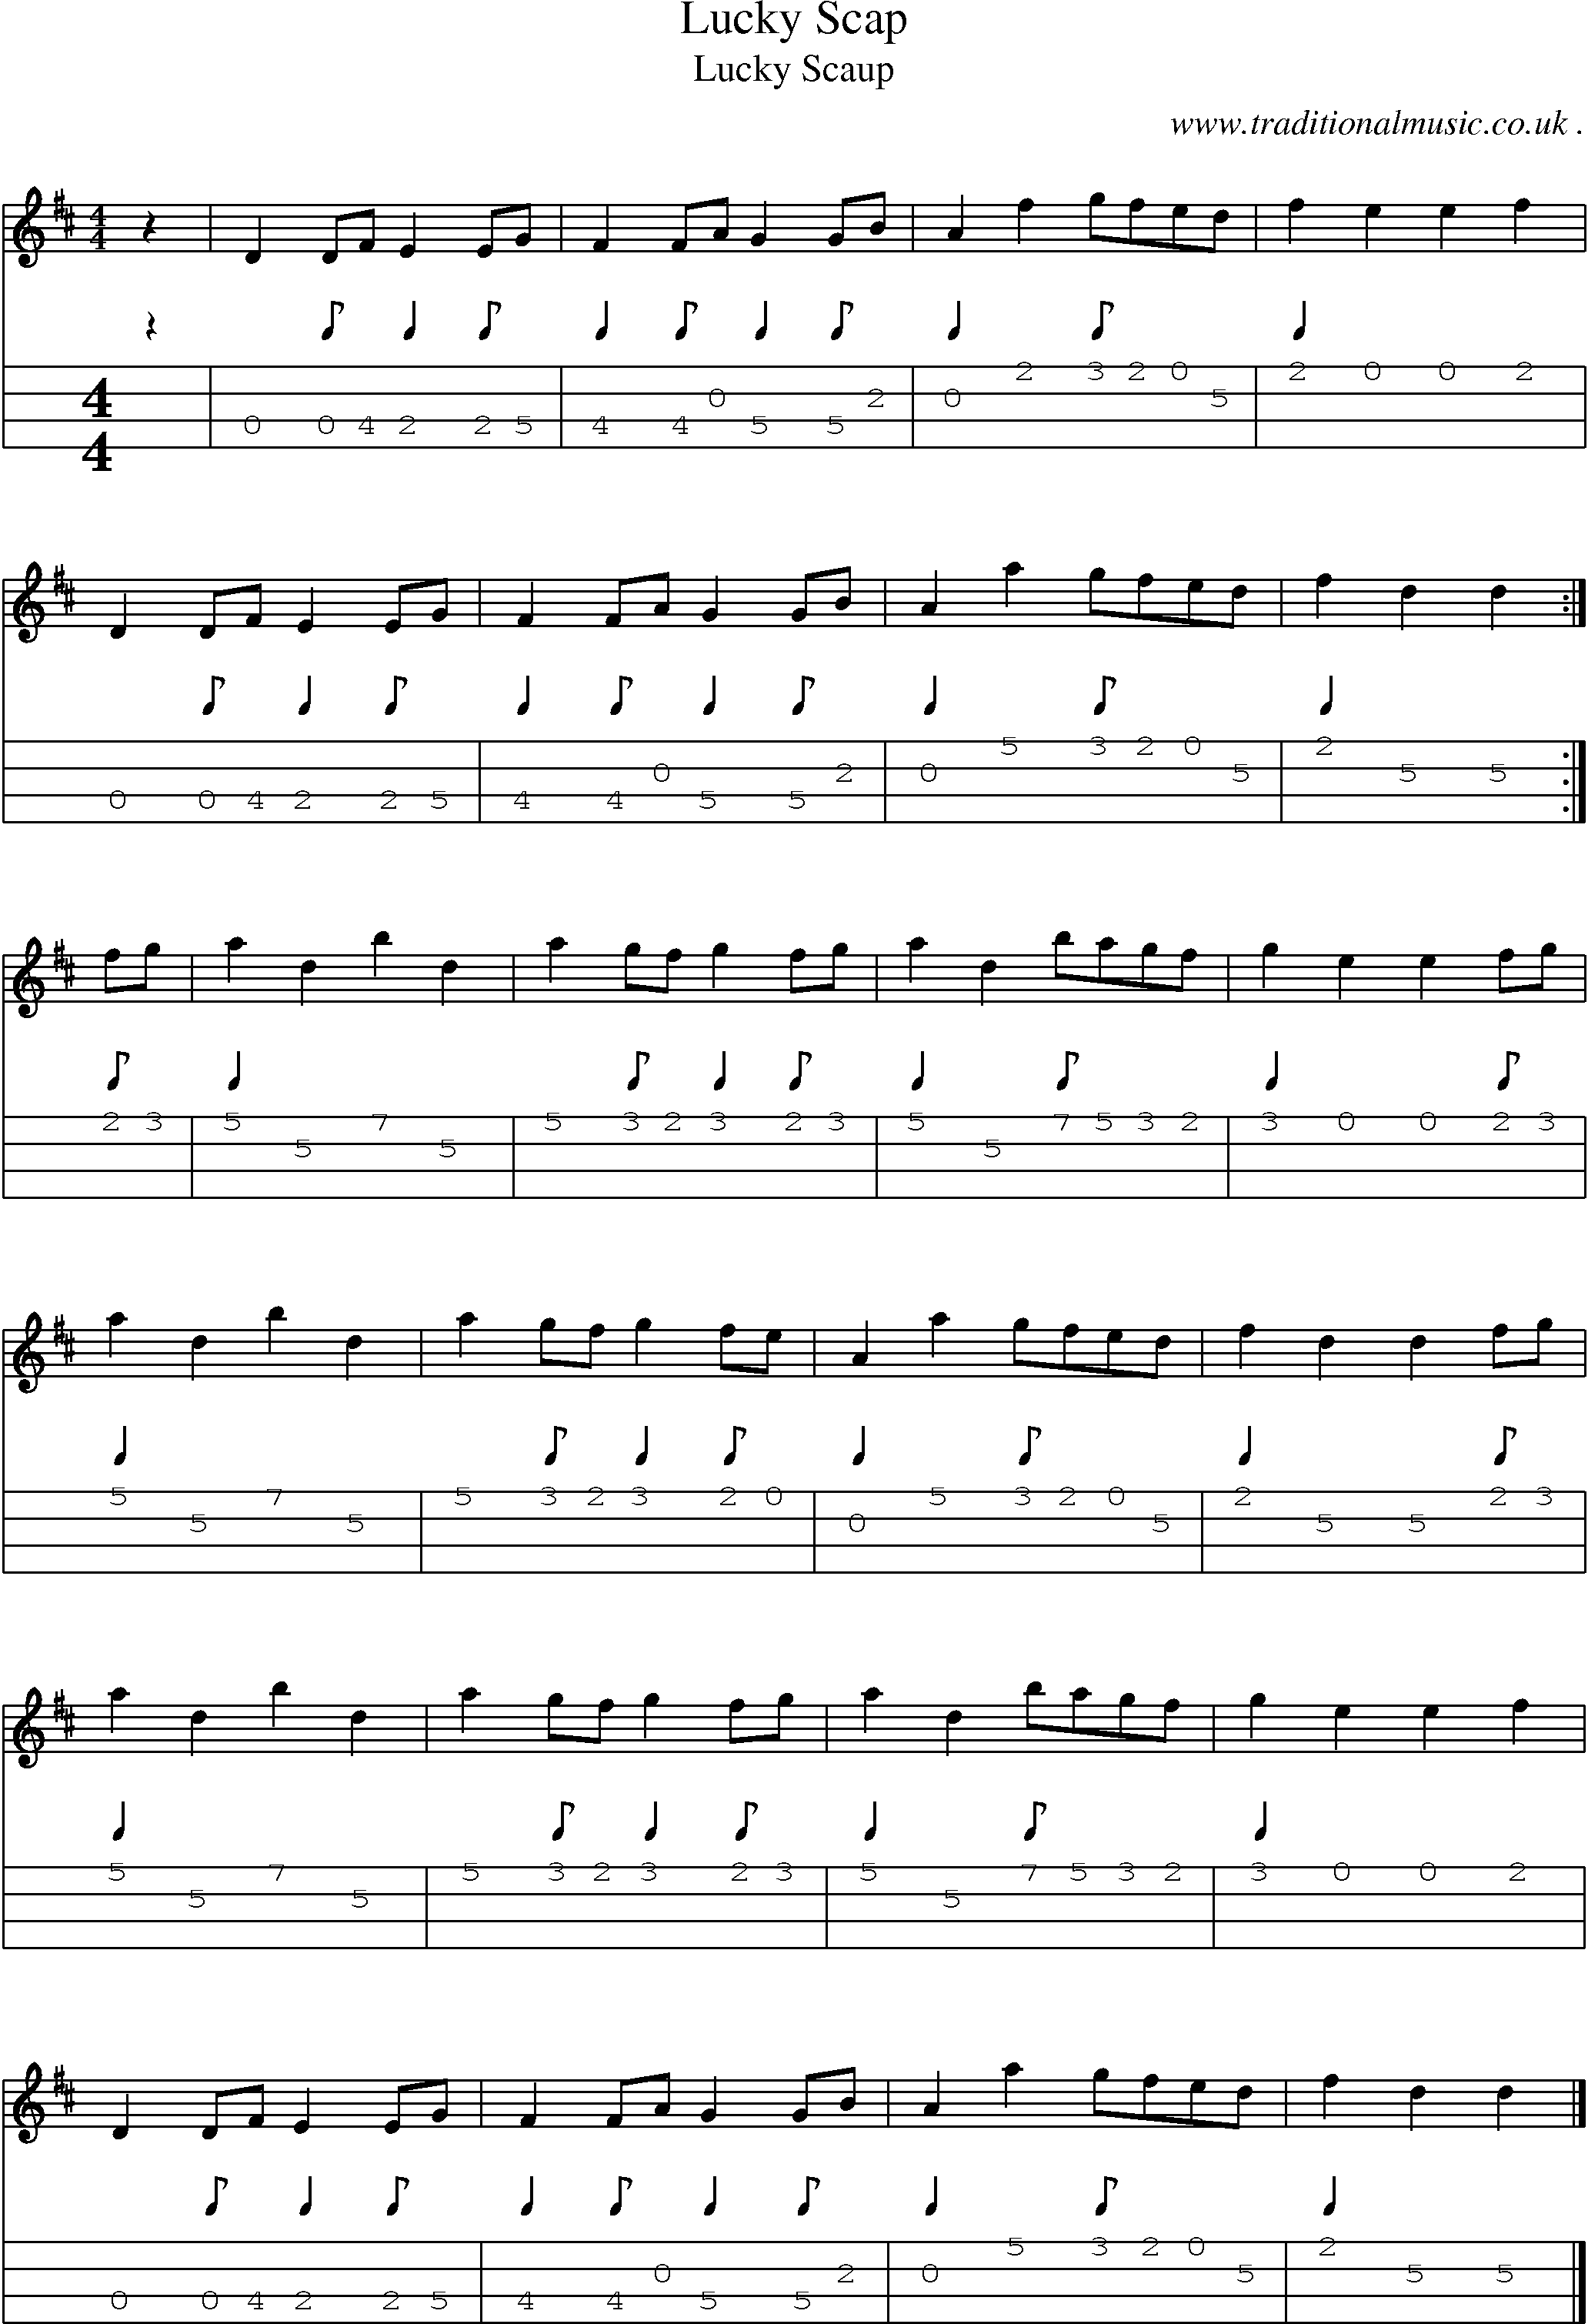 Sheet-music  score, Chords and Mandolin Tabs for Lucky Scap